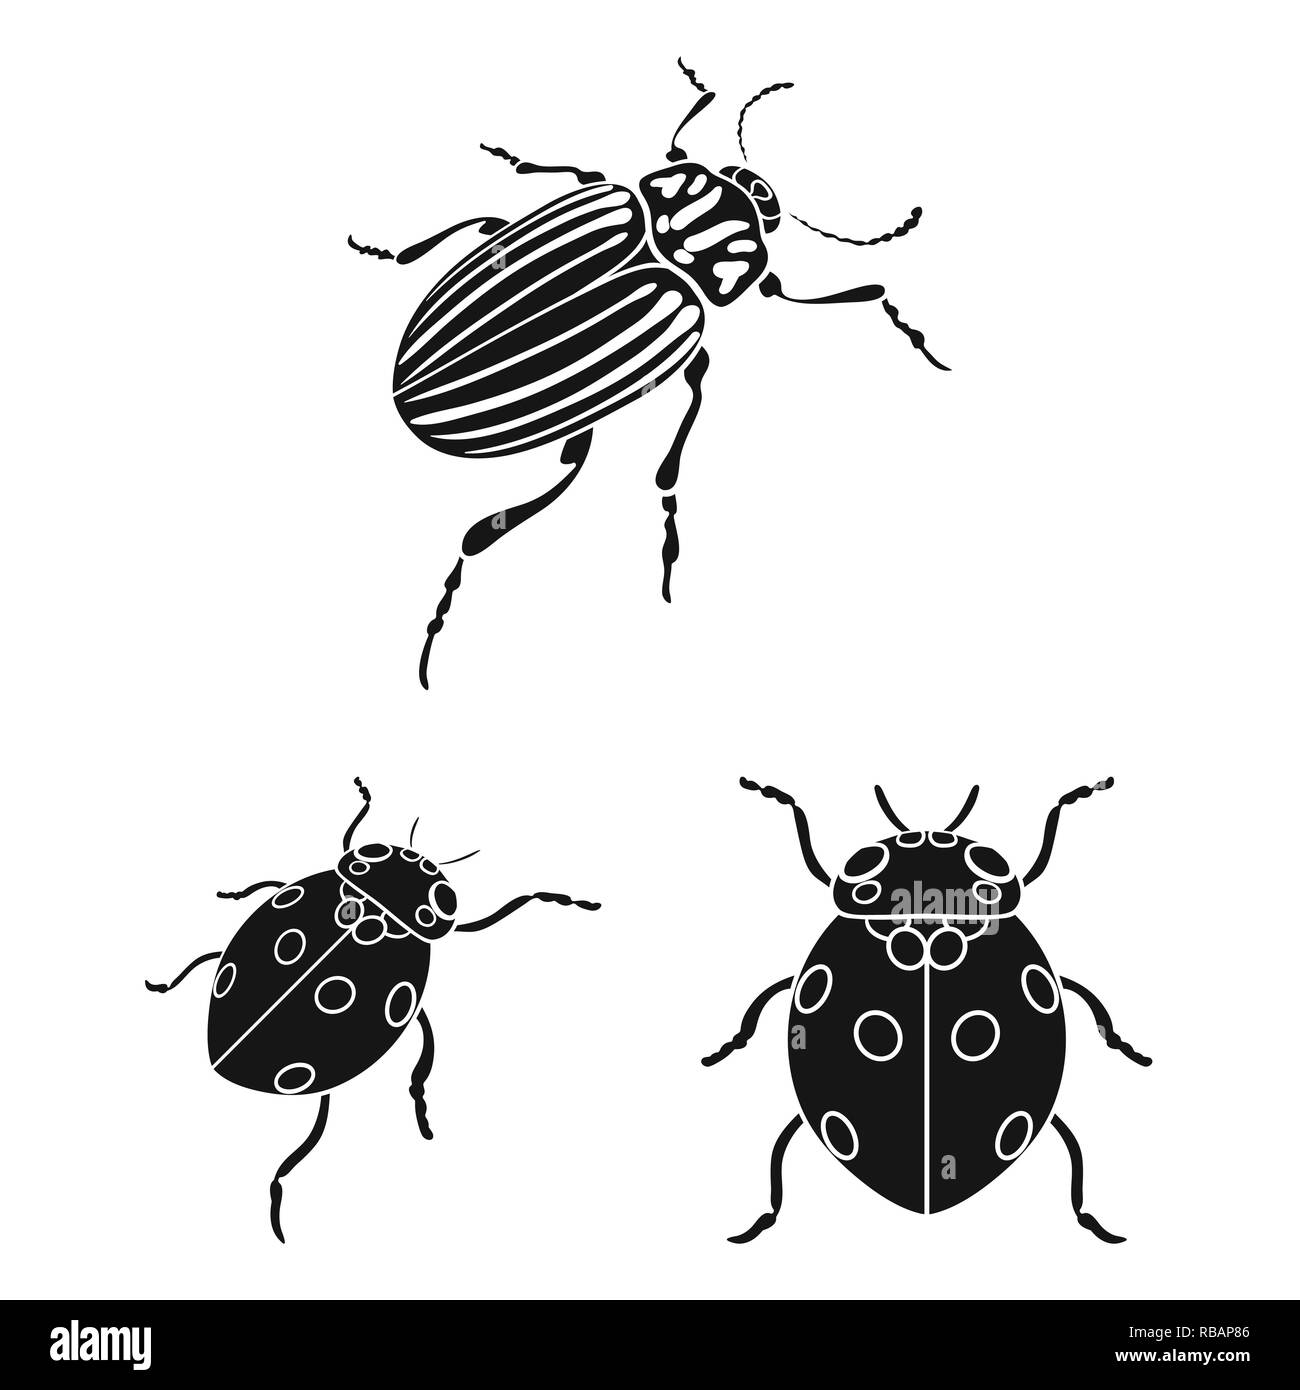 horn,ladybug,pest,bug,cockroach,insect,beetle,animal,halloween,drawn,tattoo ,nature,botanical,antenna,set,vector,icon,illustration,isolated,collection,design,element,graphic,sign, black,simple, Vector Vectors Stock Vector Image & Art - Alamy